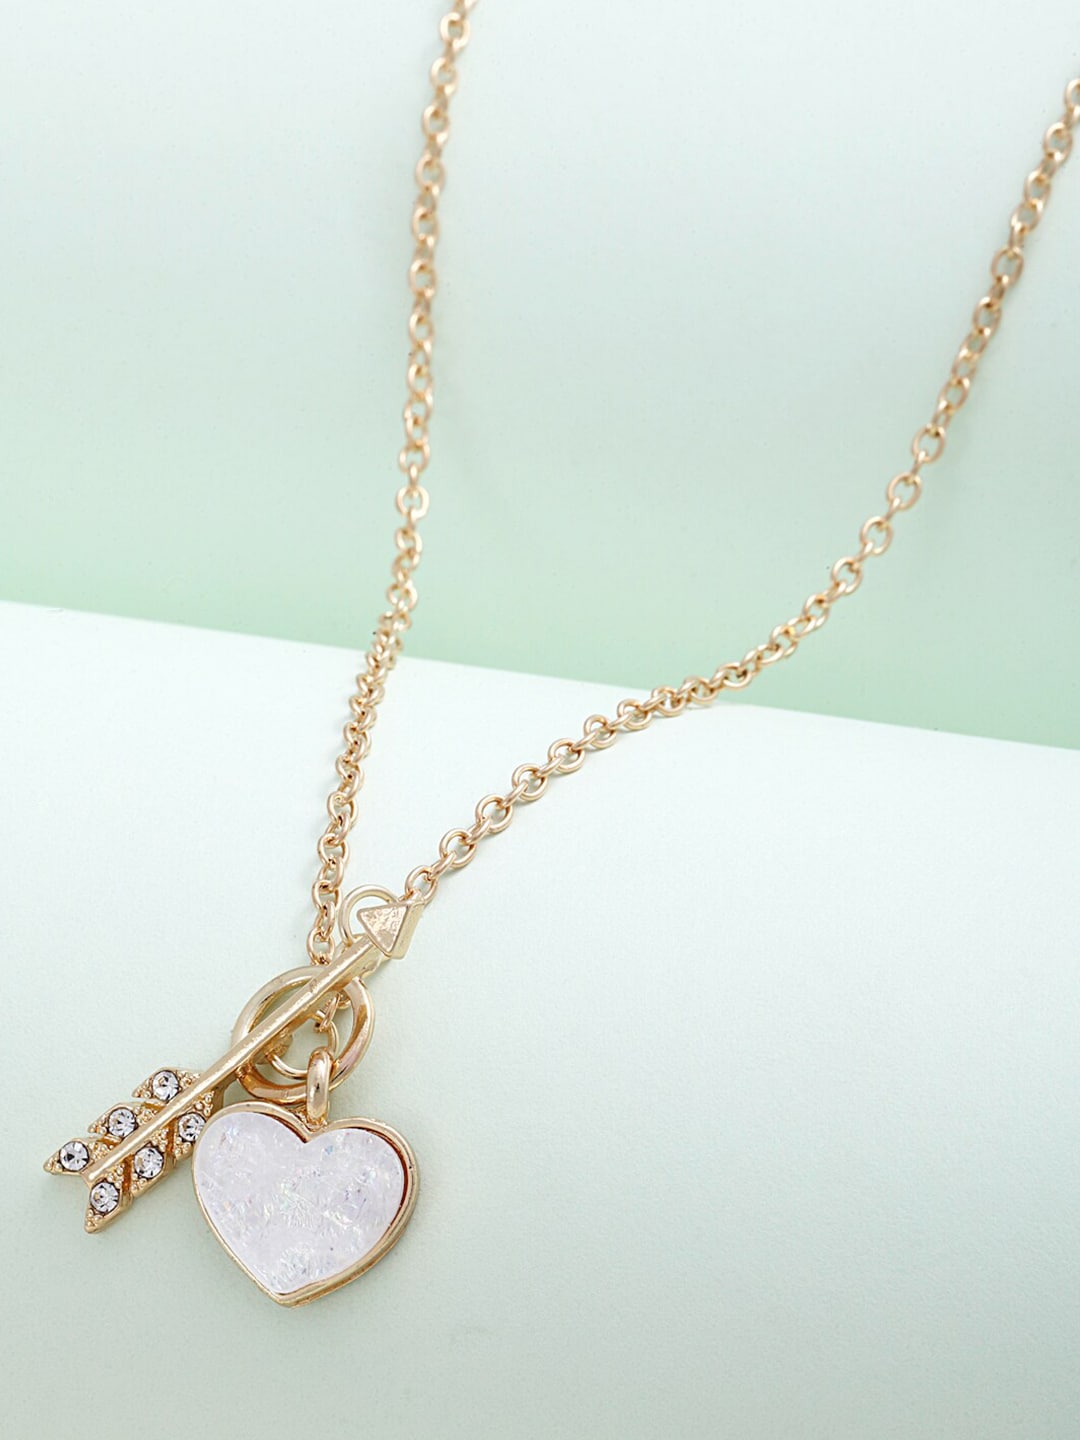 Ferosh Gold-Toned Arrow- Heart Chain Necklace Price in India